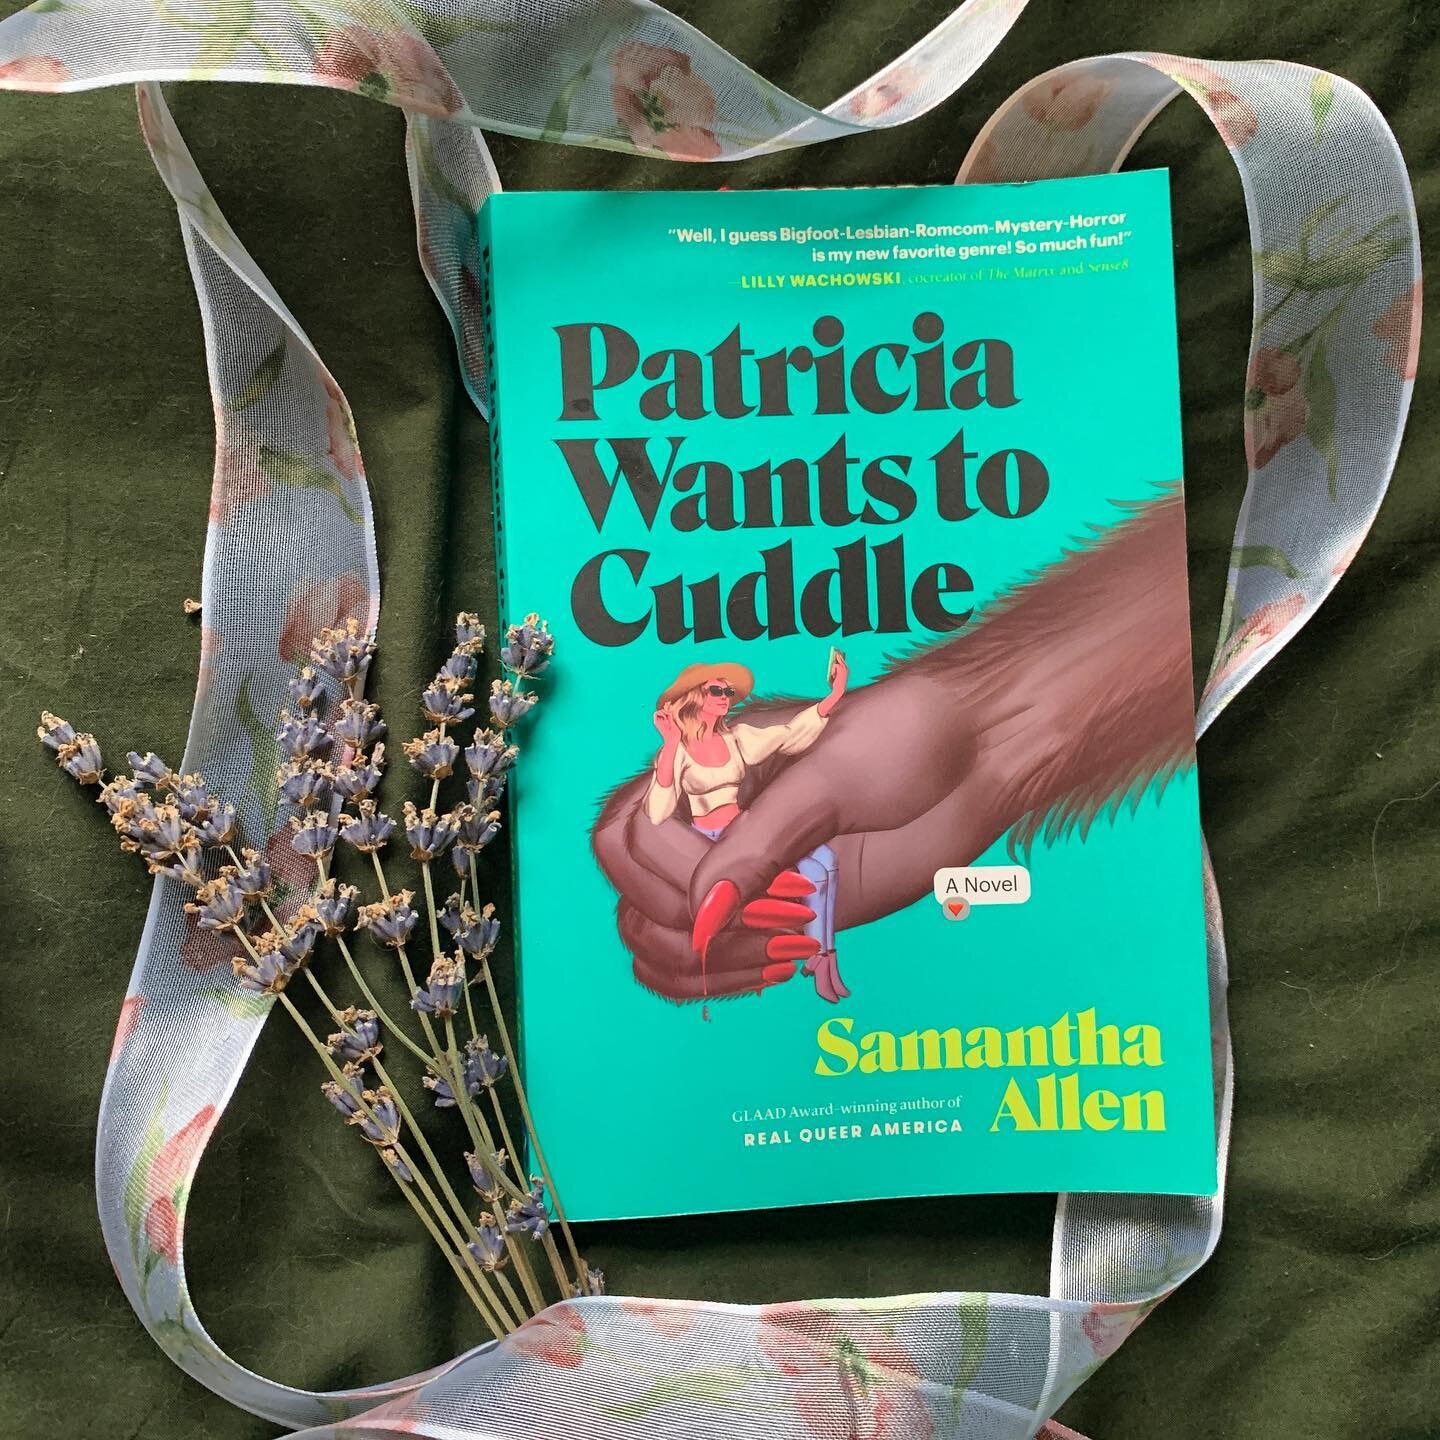 February Book Pick 💖

I have been flying through our February book pick, PATRICIA WANTS TO CUDDLE! It&rsquo;s giving me everything I could hope for and I can&rsquo;t wait to see how it ends 👀
.
On this season of The Catch, contestants must compete 